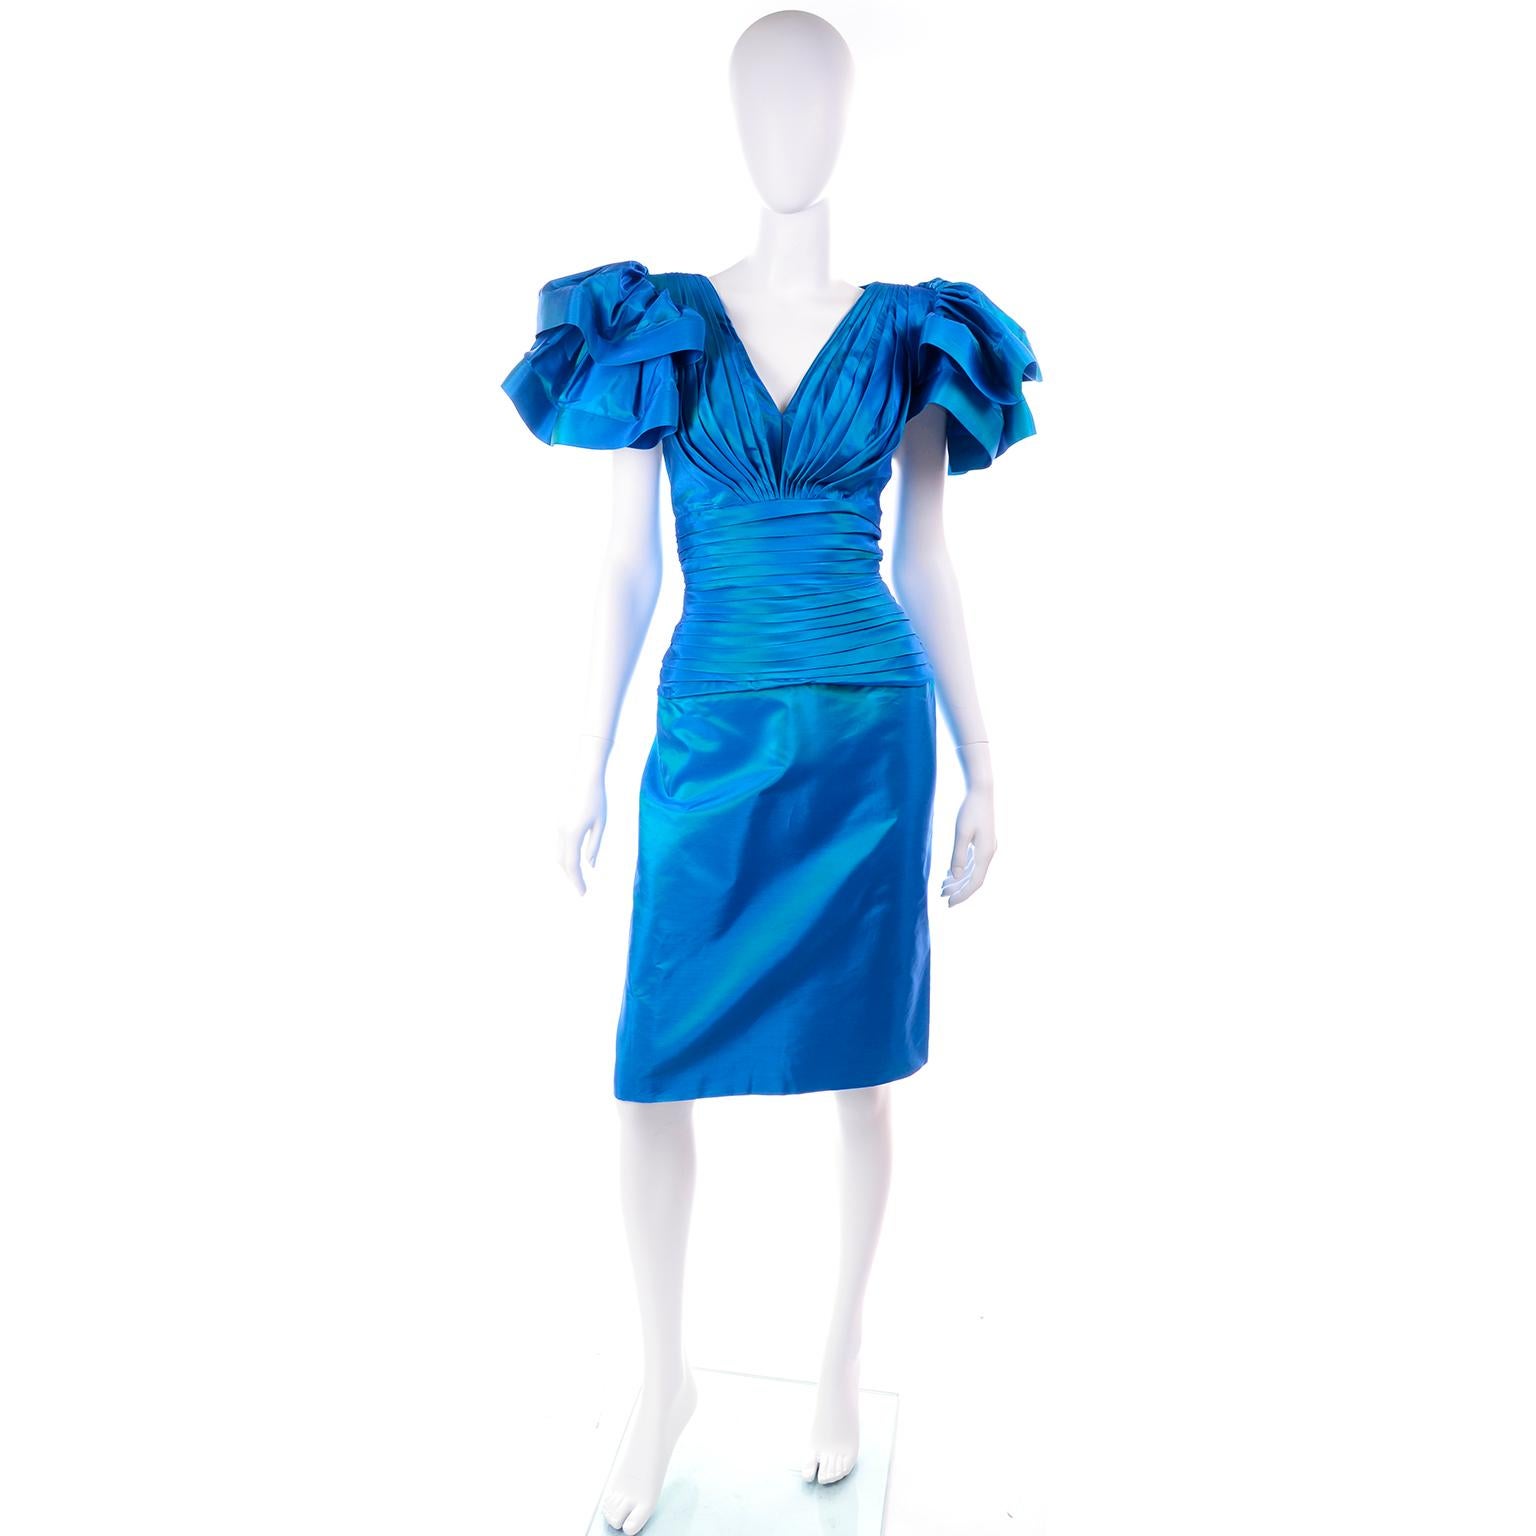 This is a dramatic vintage 1980's iridescent blue green evening dress from Tadashi. The dress was made in the USA and though it is marked a vintage size 10, it fits more like a modern day size 6/8.There is a YKK metal zipper down center back seam,